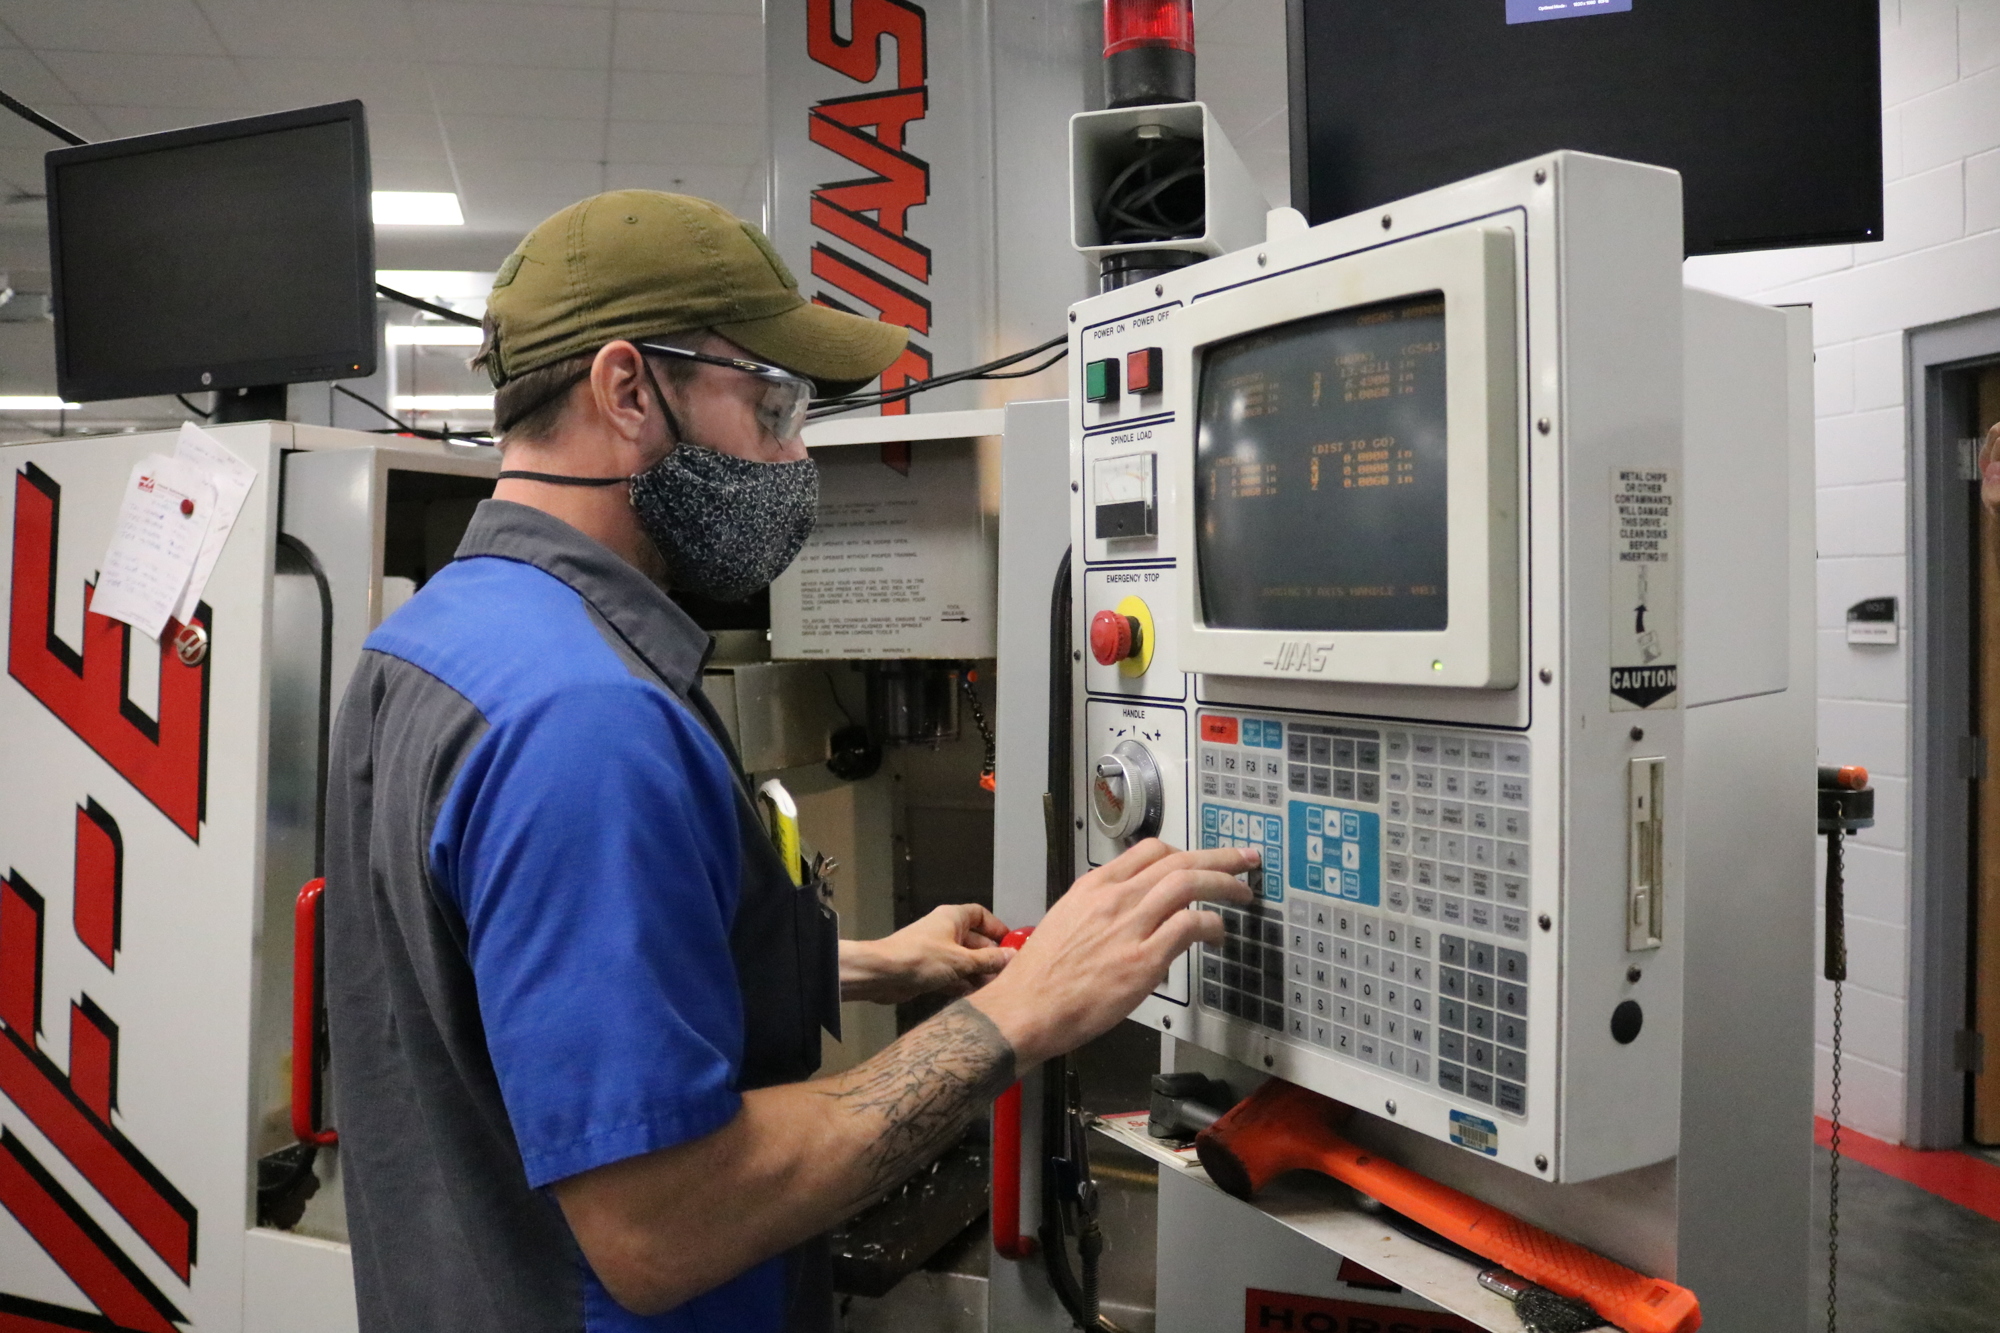 Bryan Monville, a CNC Production Technology student, operates a CNC mill to produce a part for a U.S. Department of Defense contractor. Courtesy photo.